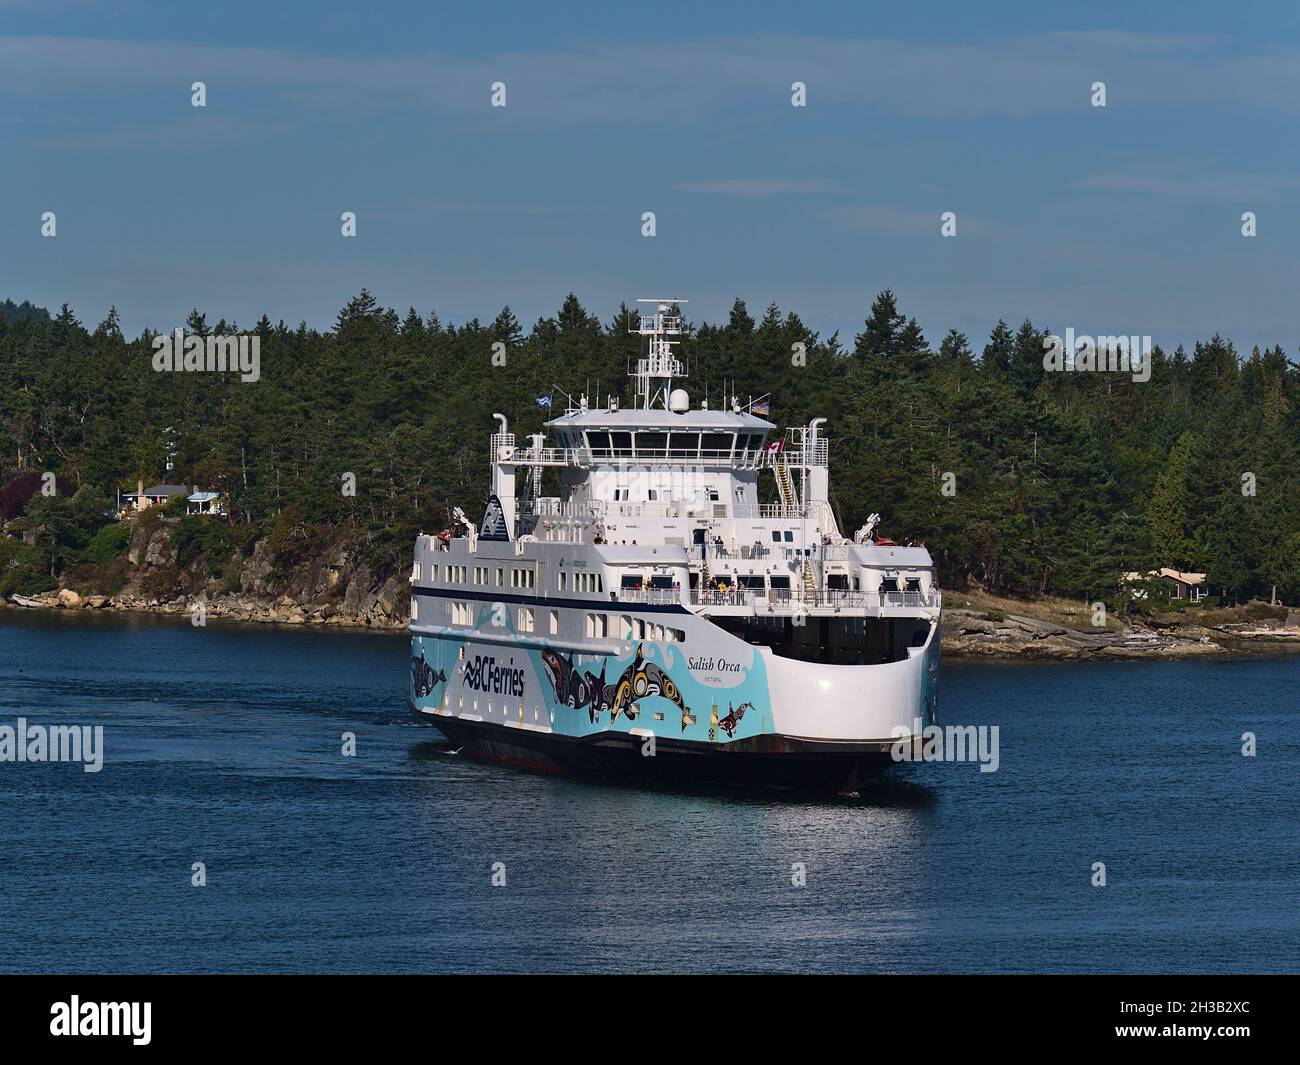 View of BC Ferries ship Salish Orca after leaving Sturdies Bay ferry terminal at Galiano Island, part of the Gulf Islands, on sunny day in fall. Stock Photo